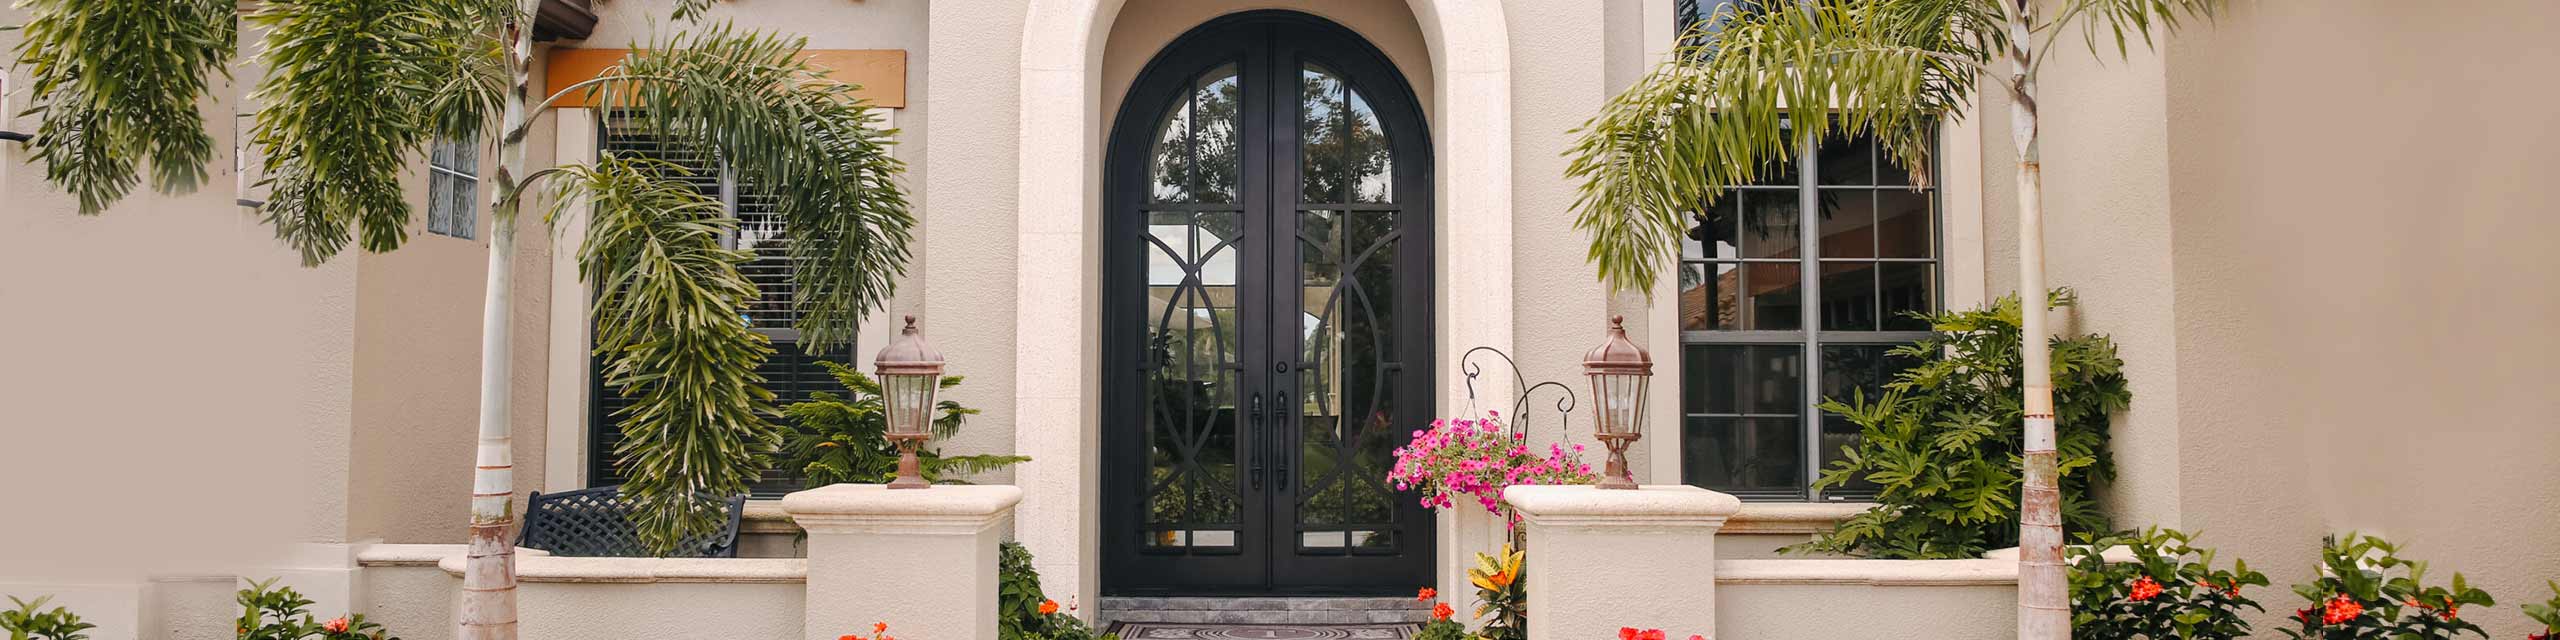 glory iron doors best iron front doors for homeowners or business